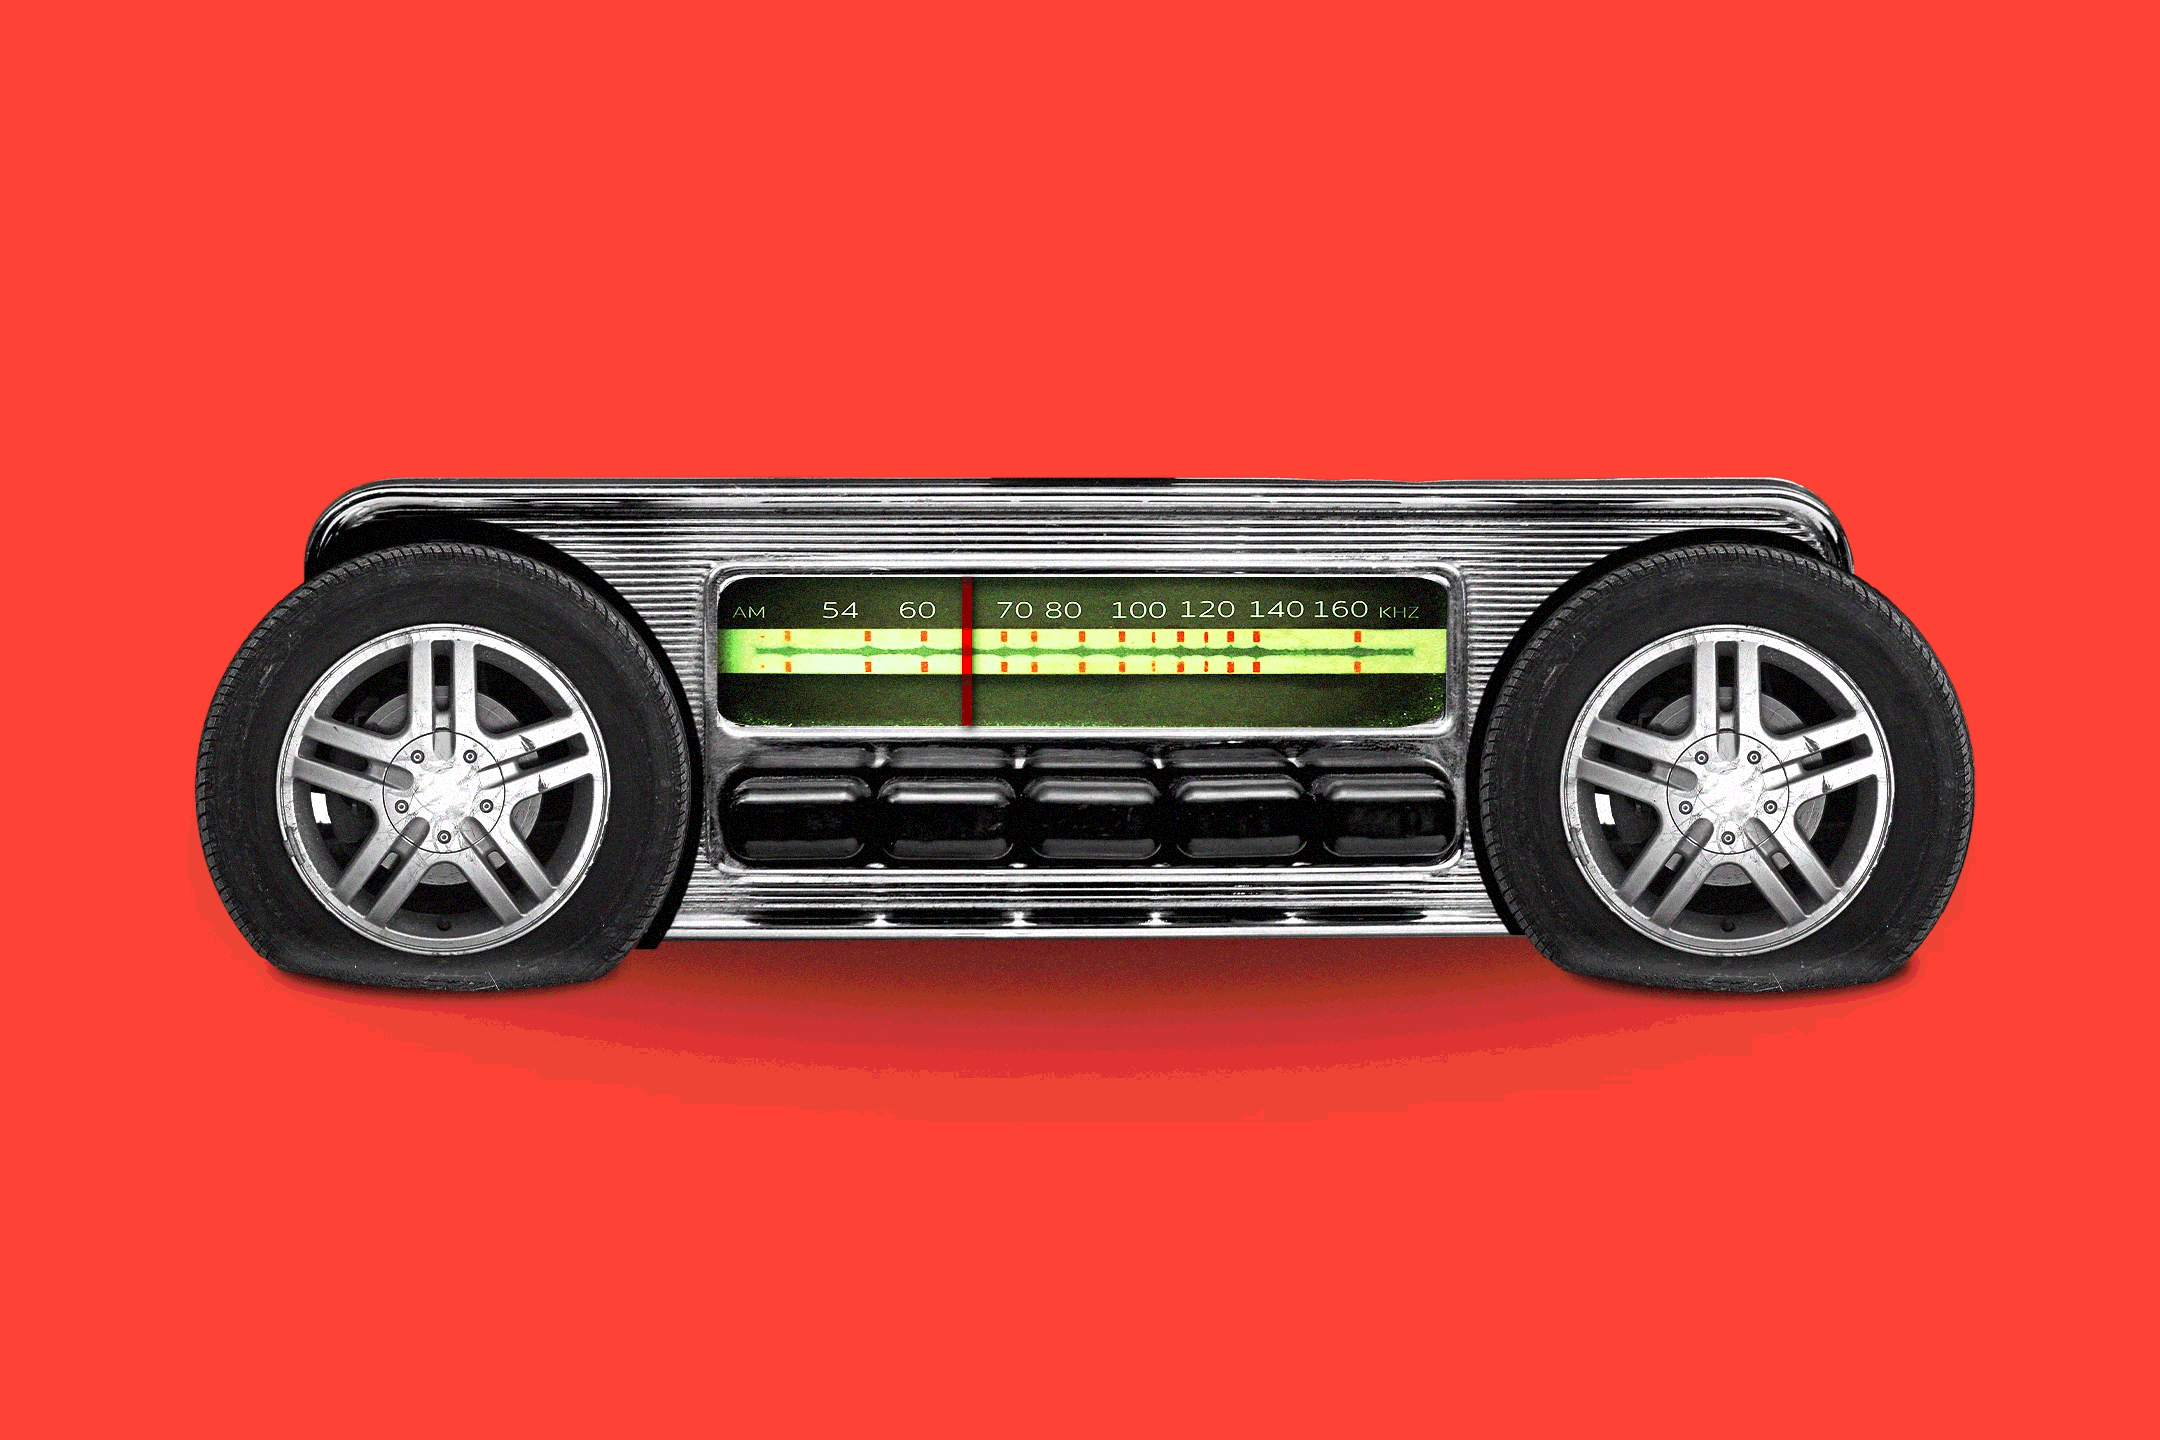 AM radio served the country for 100 years. Will electric vehicles silence it?